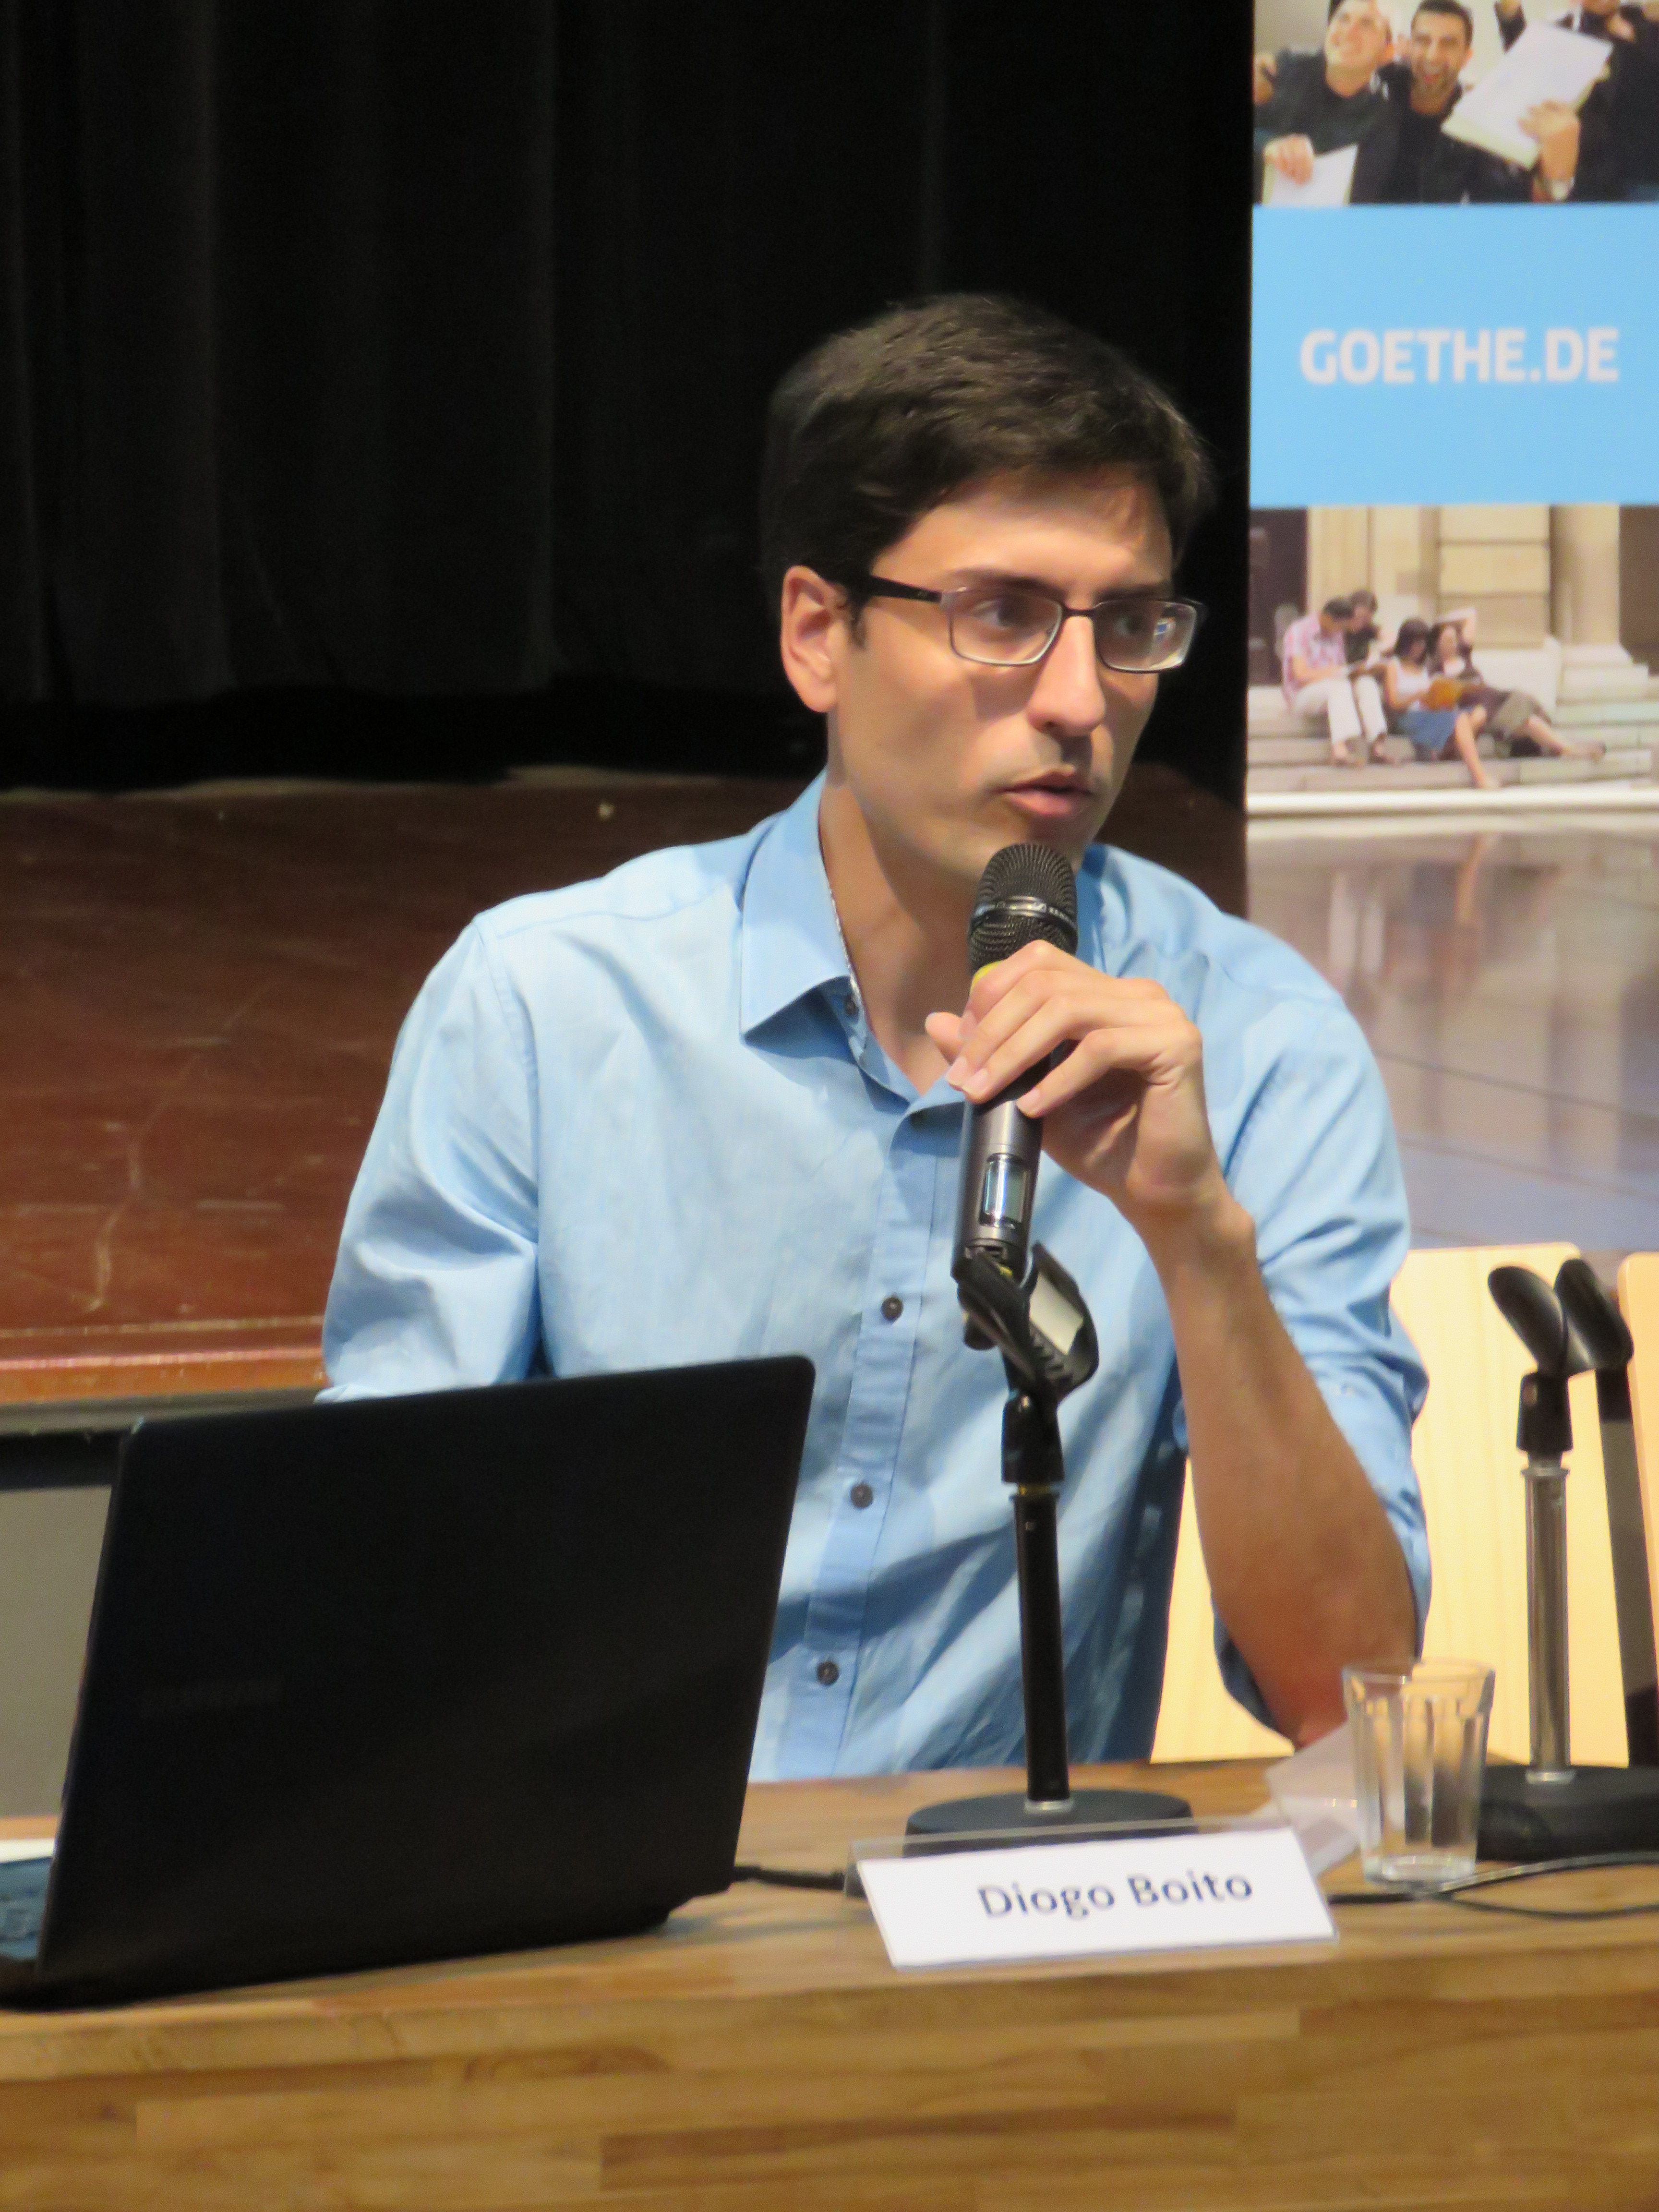 Diogo Boito (USP/TUM) chronicles his experiences in Germany at the event in Sao Paulo